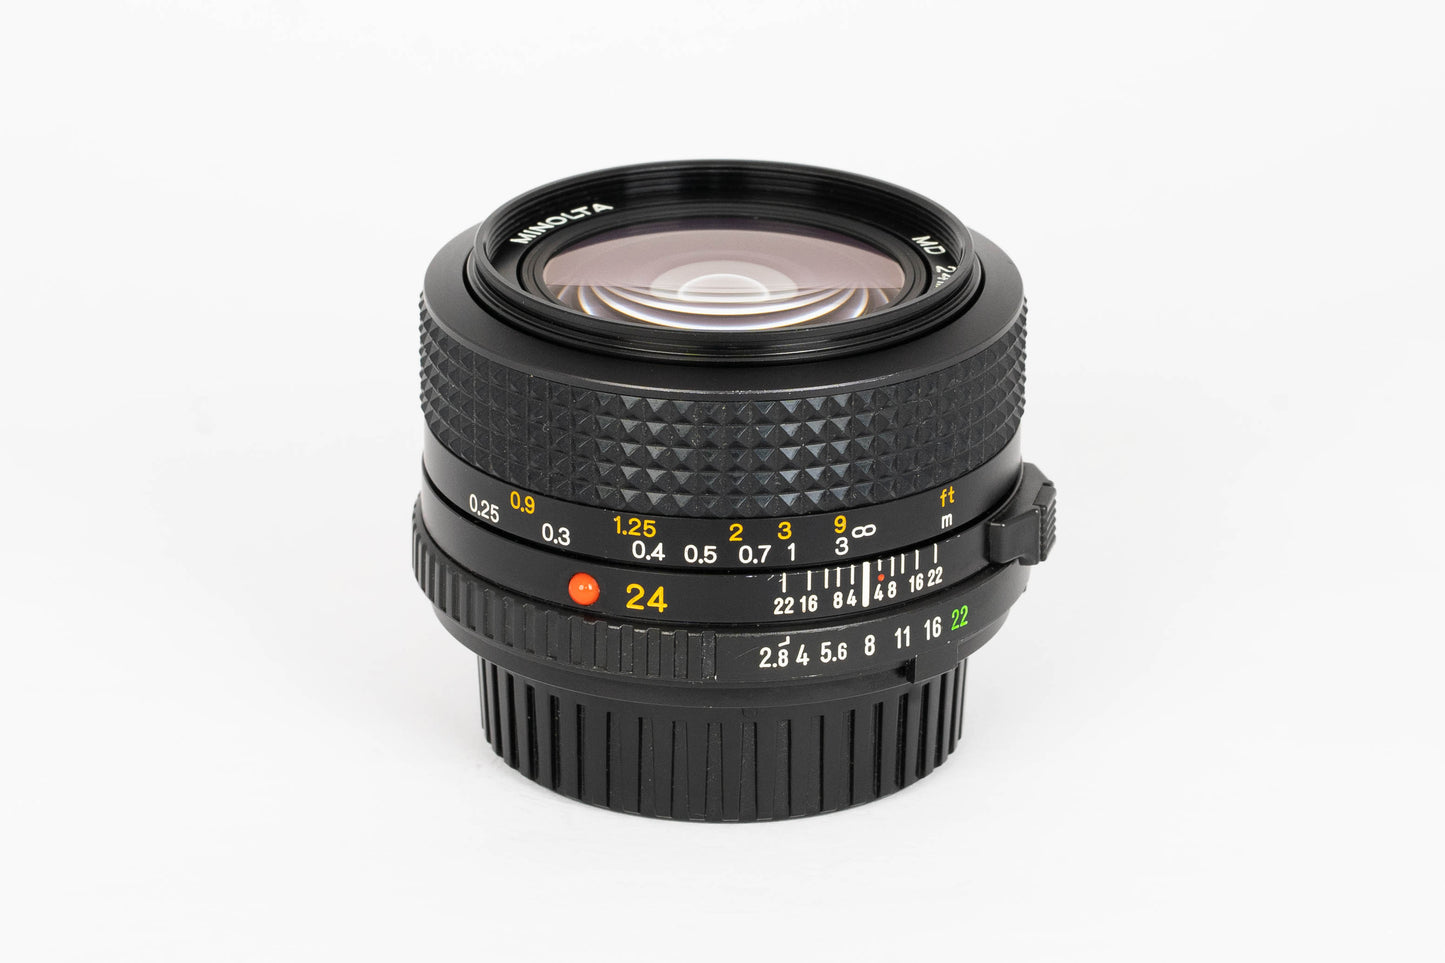 Minolta New MD 24mm F/2.8 Wide Angle Lens for MC MD Mount